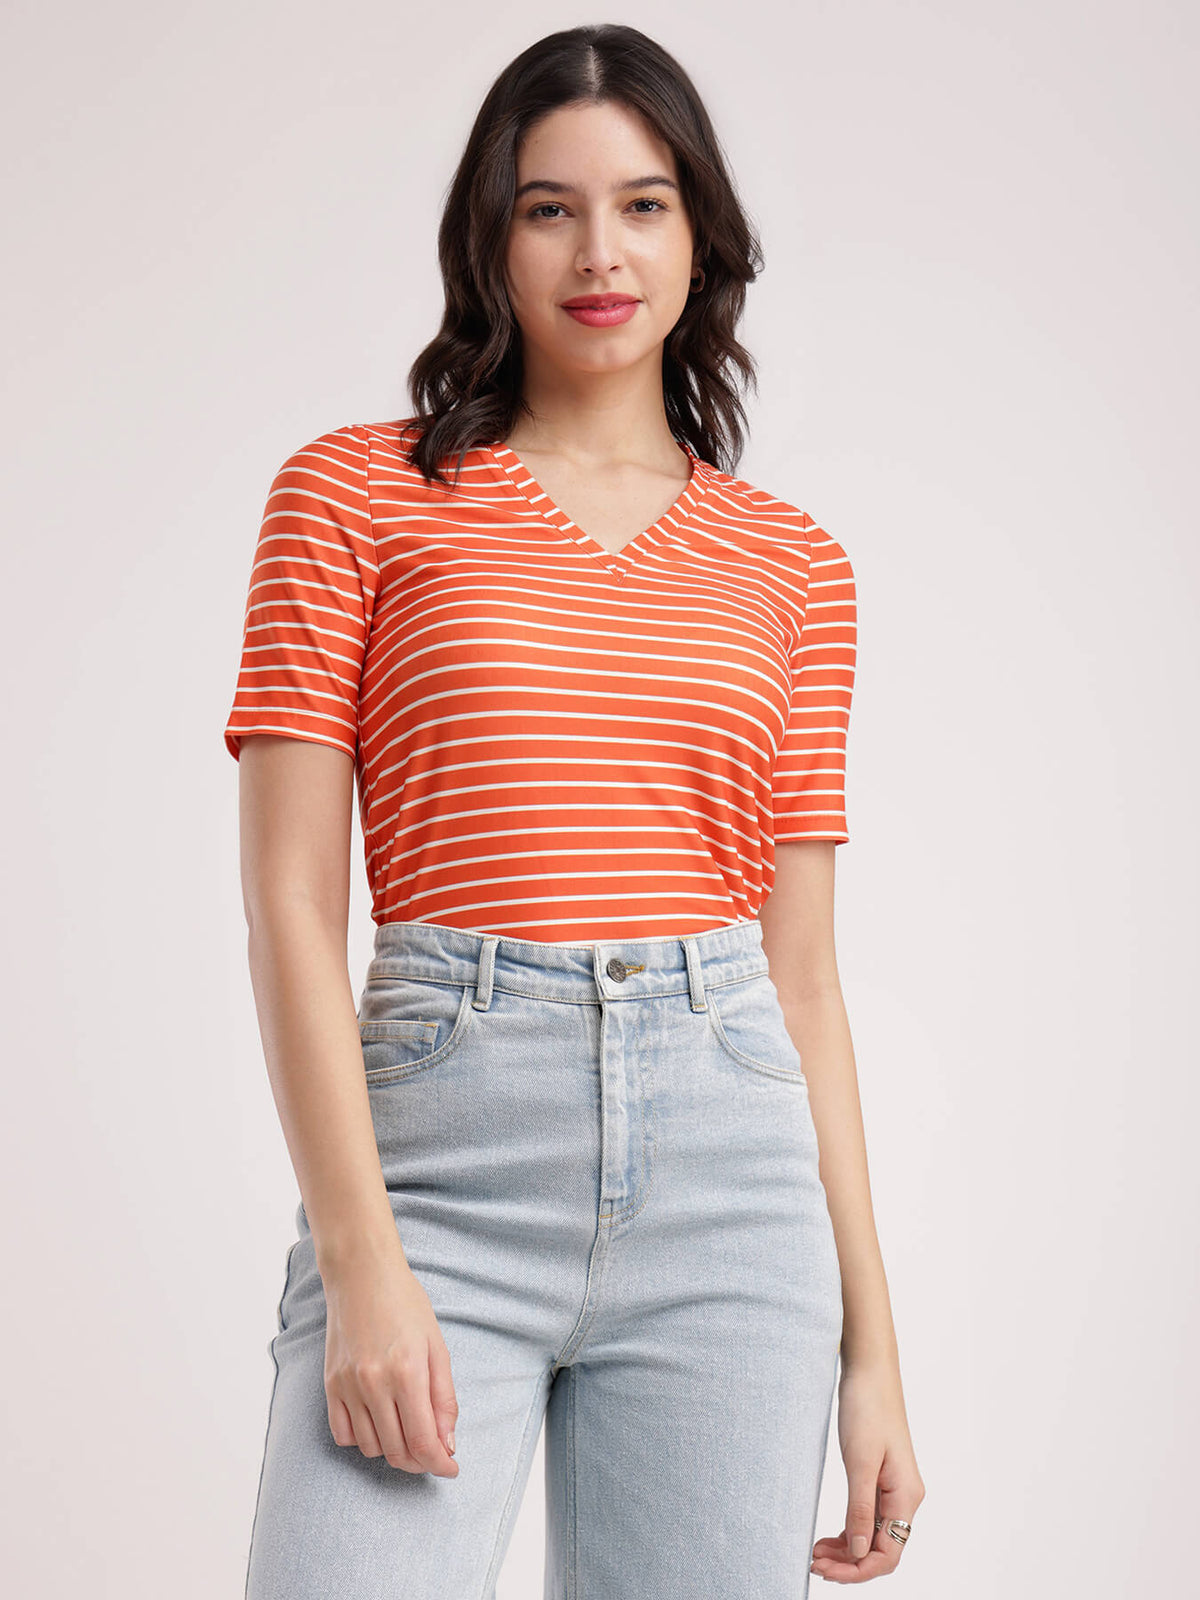 Striped Knitted T-Shirt - Orange And White